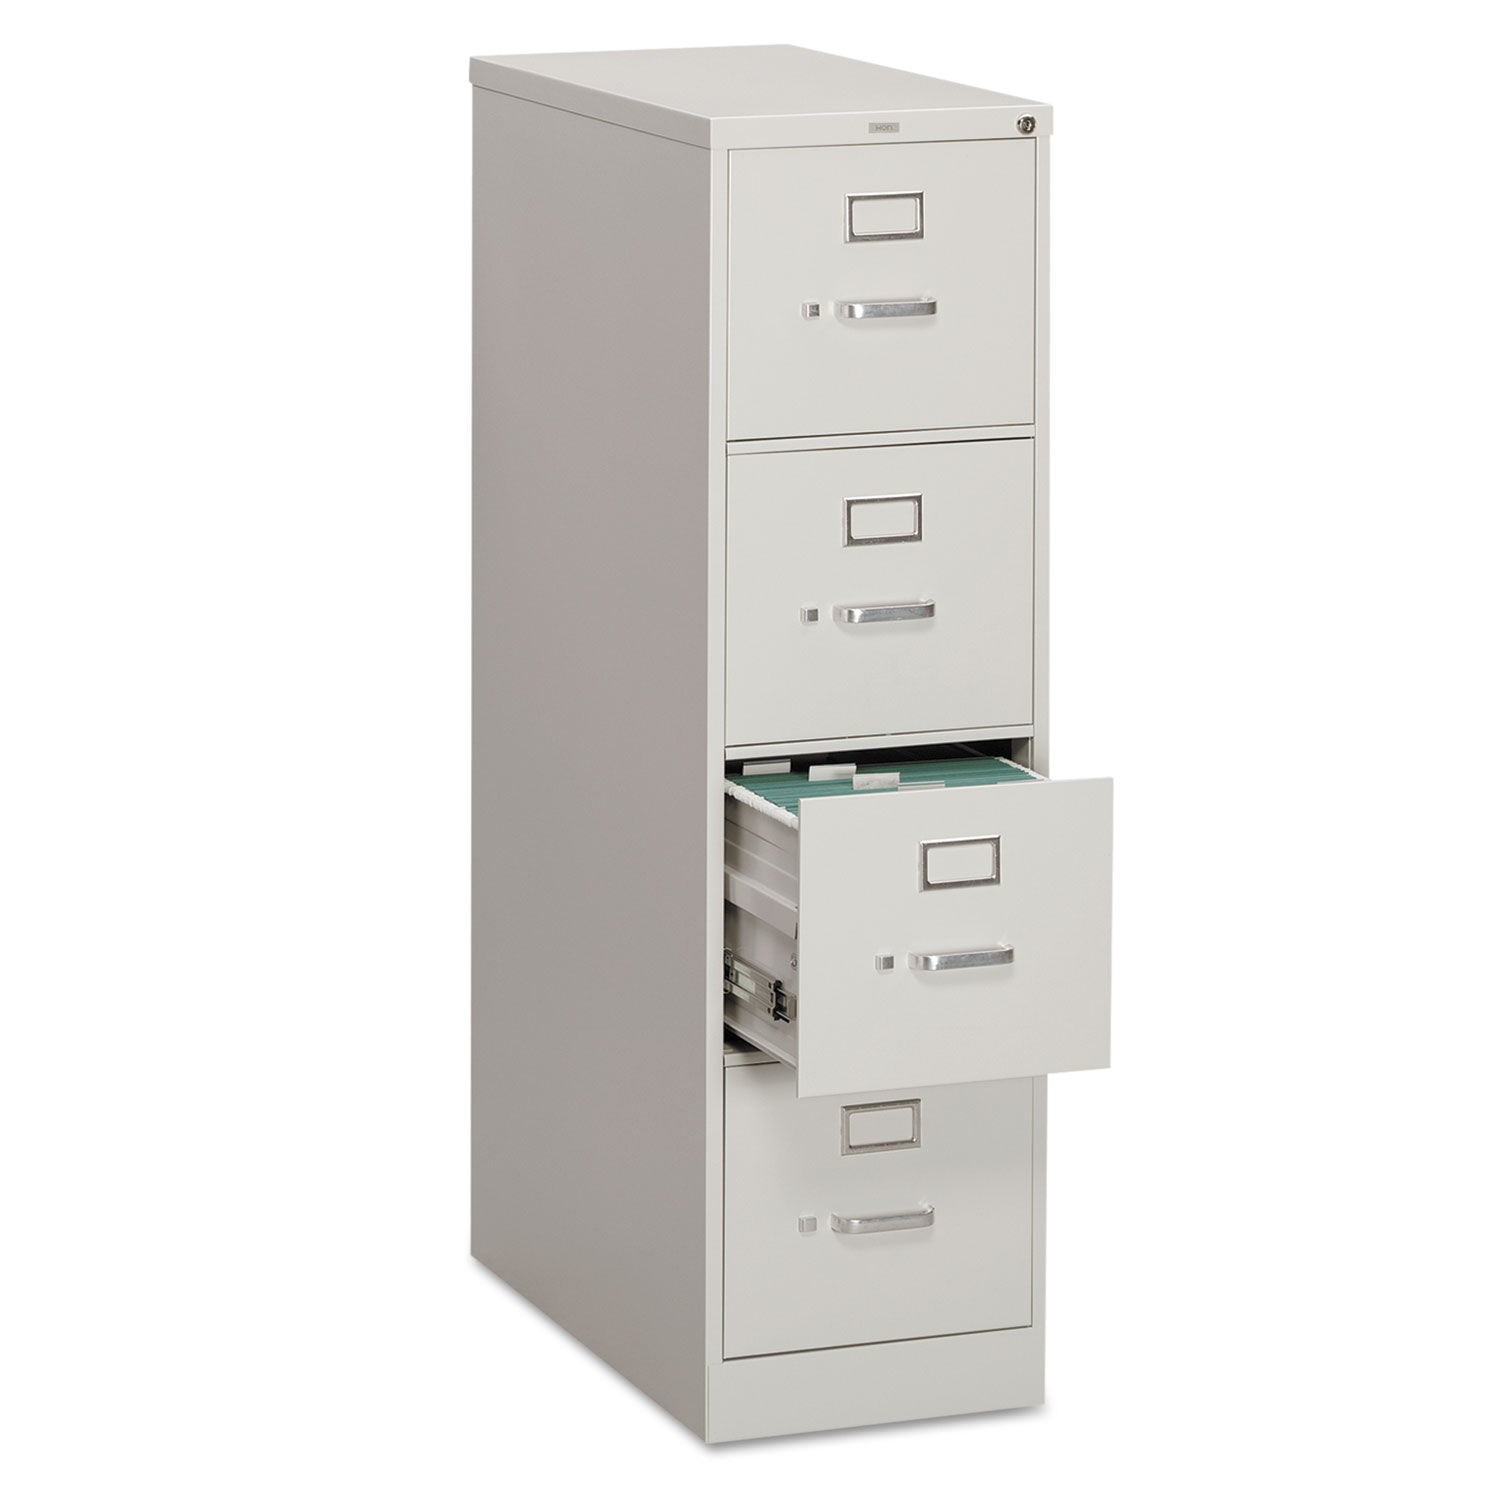 310 Series Vertical File, 4 Letter-Size File Drawers, Light Gray, 15" x 26.5" x 52 - 